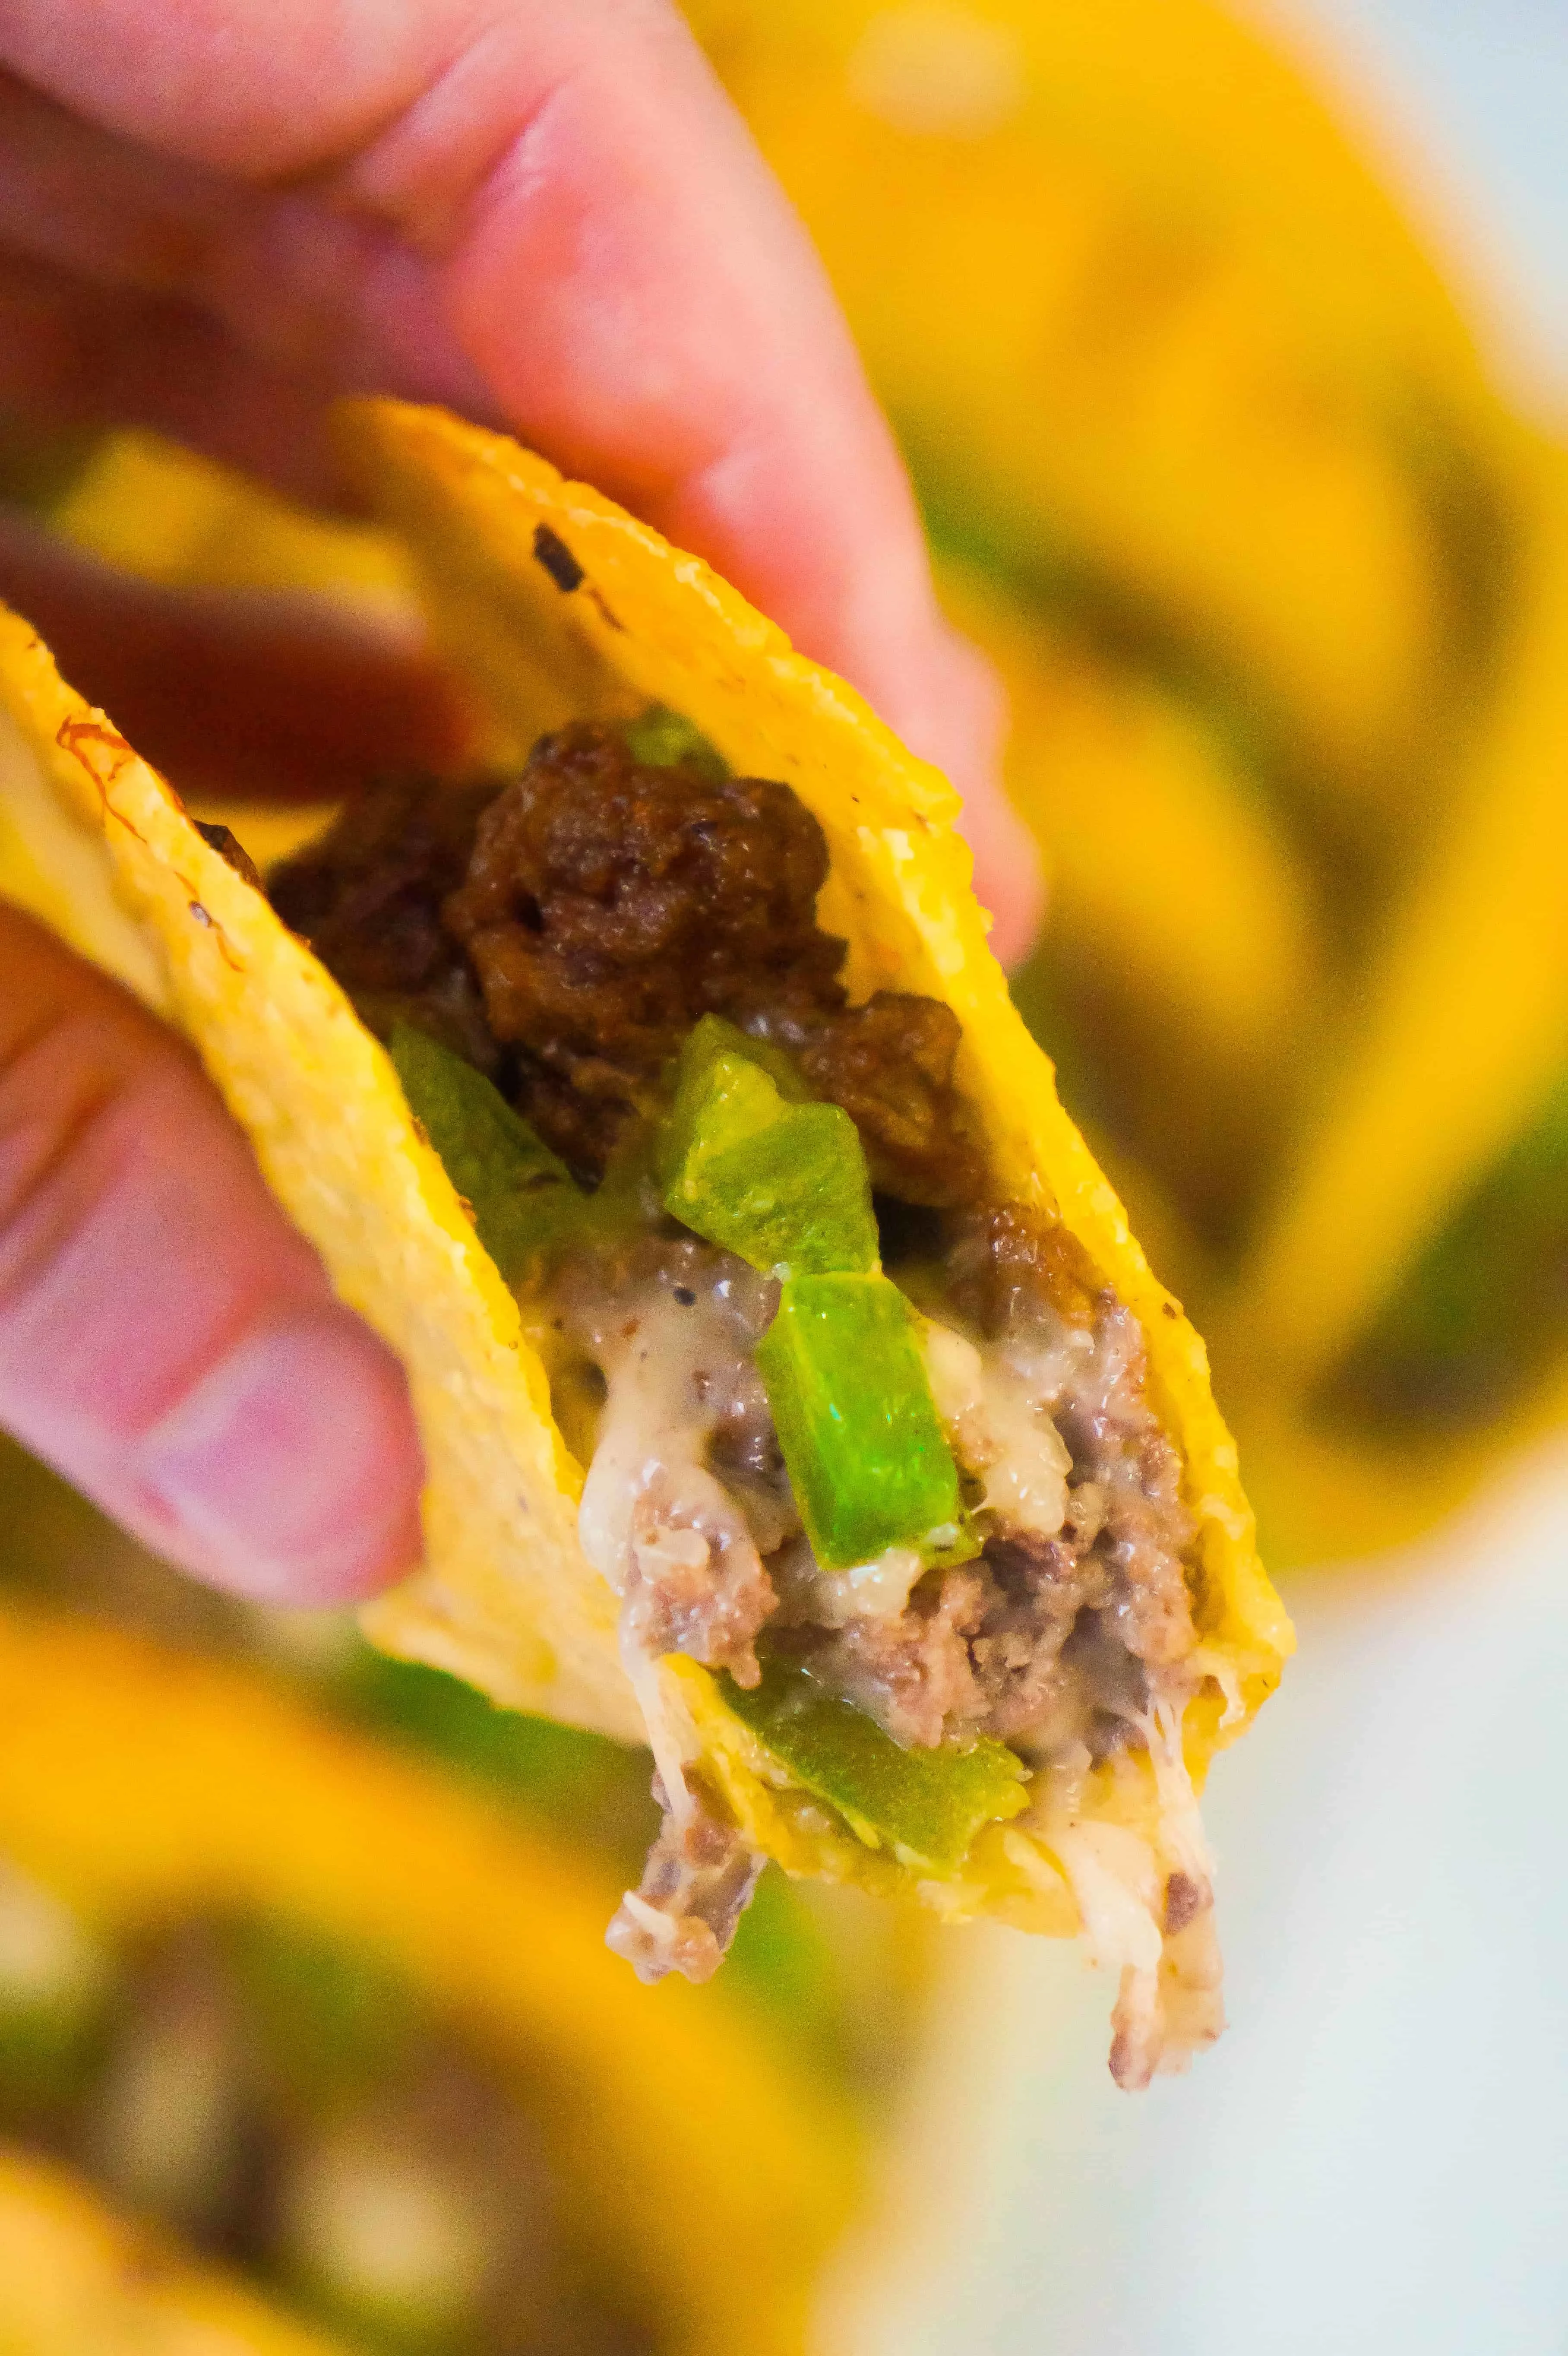 Philly Cheese Steak Tacos are an easy ground beef dinner recipe using Stand and Stuff taco shells.